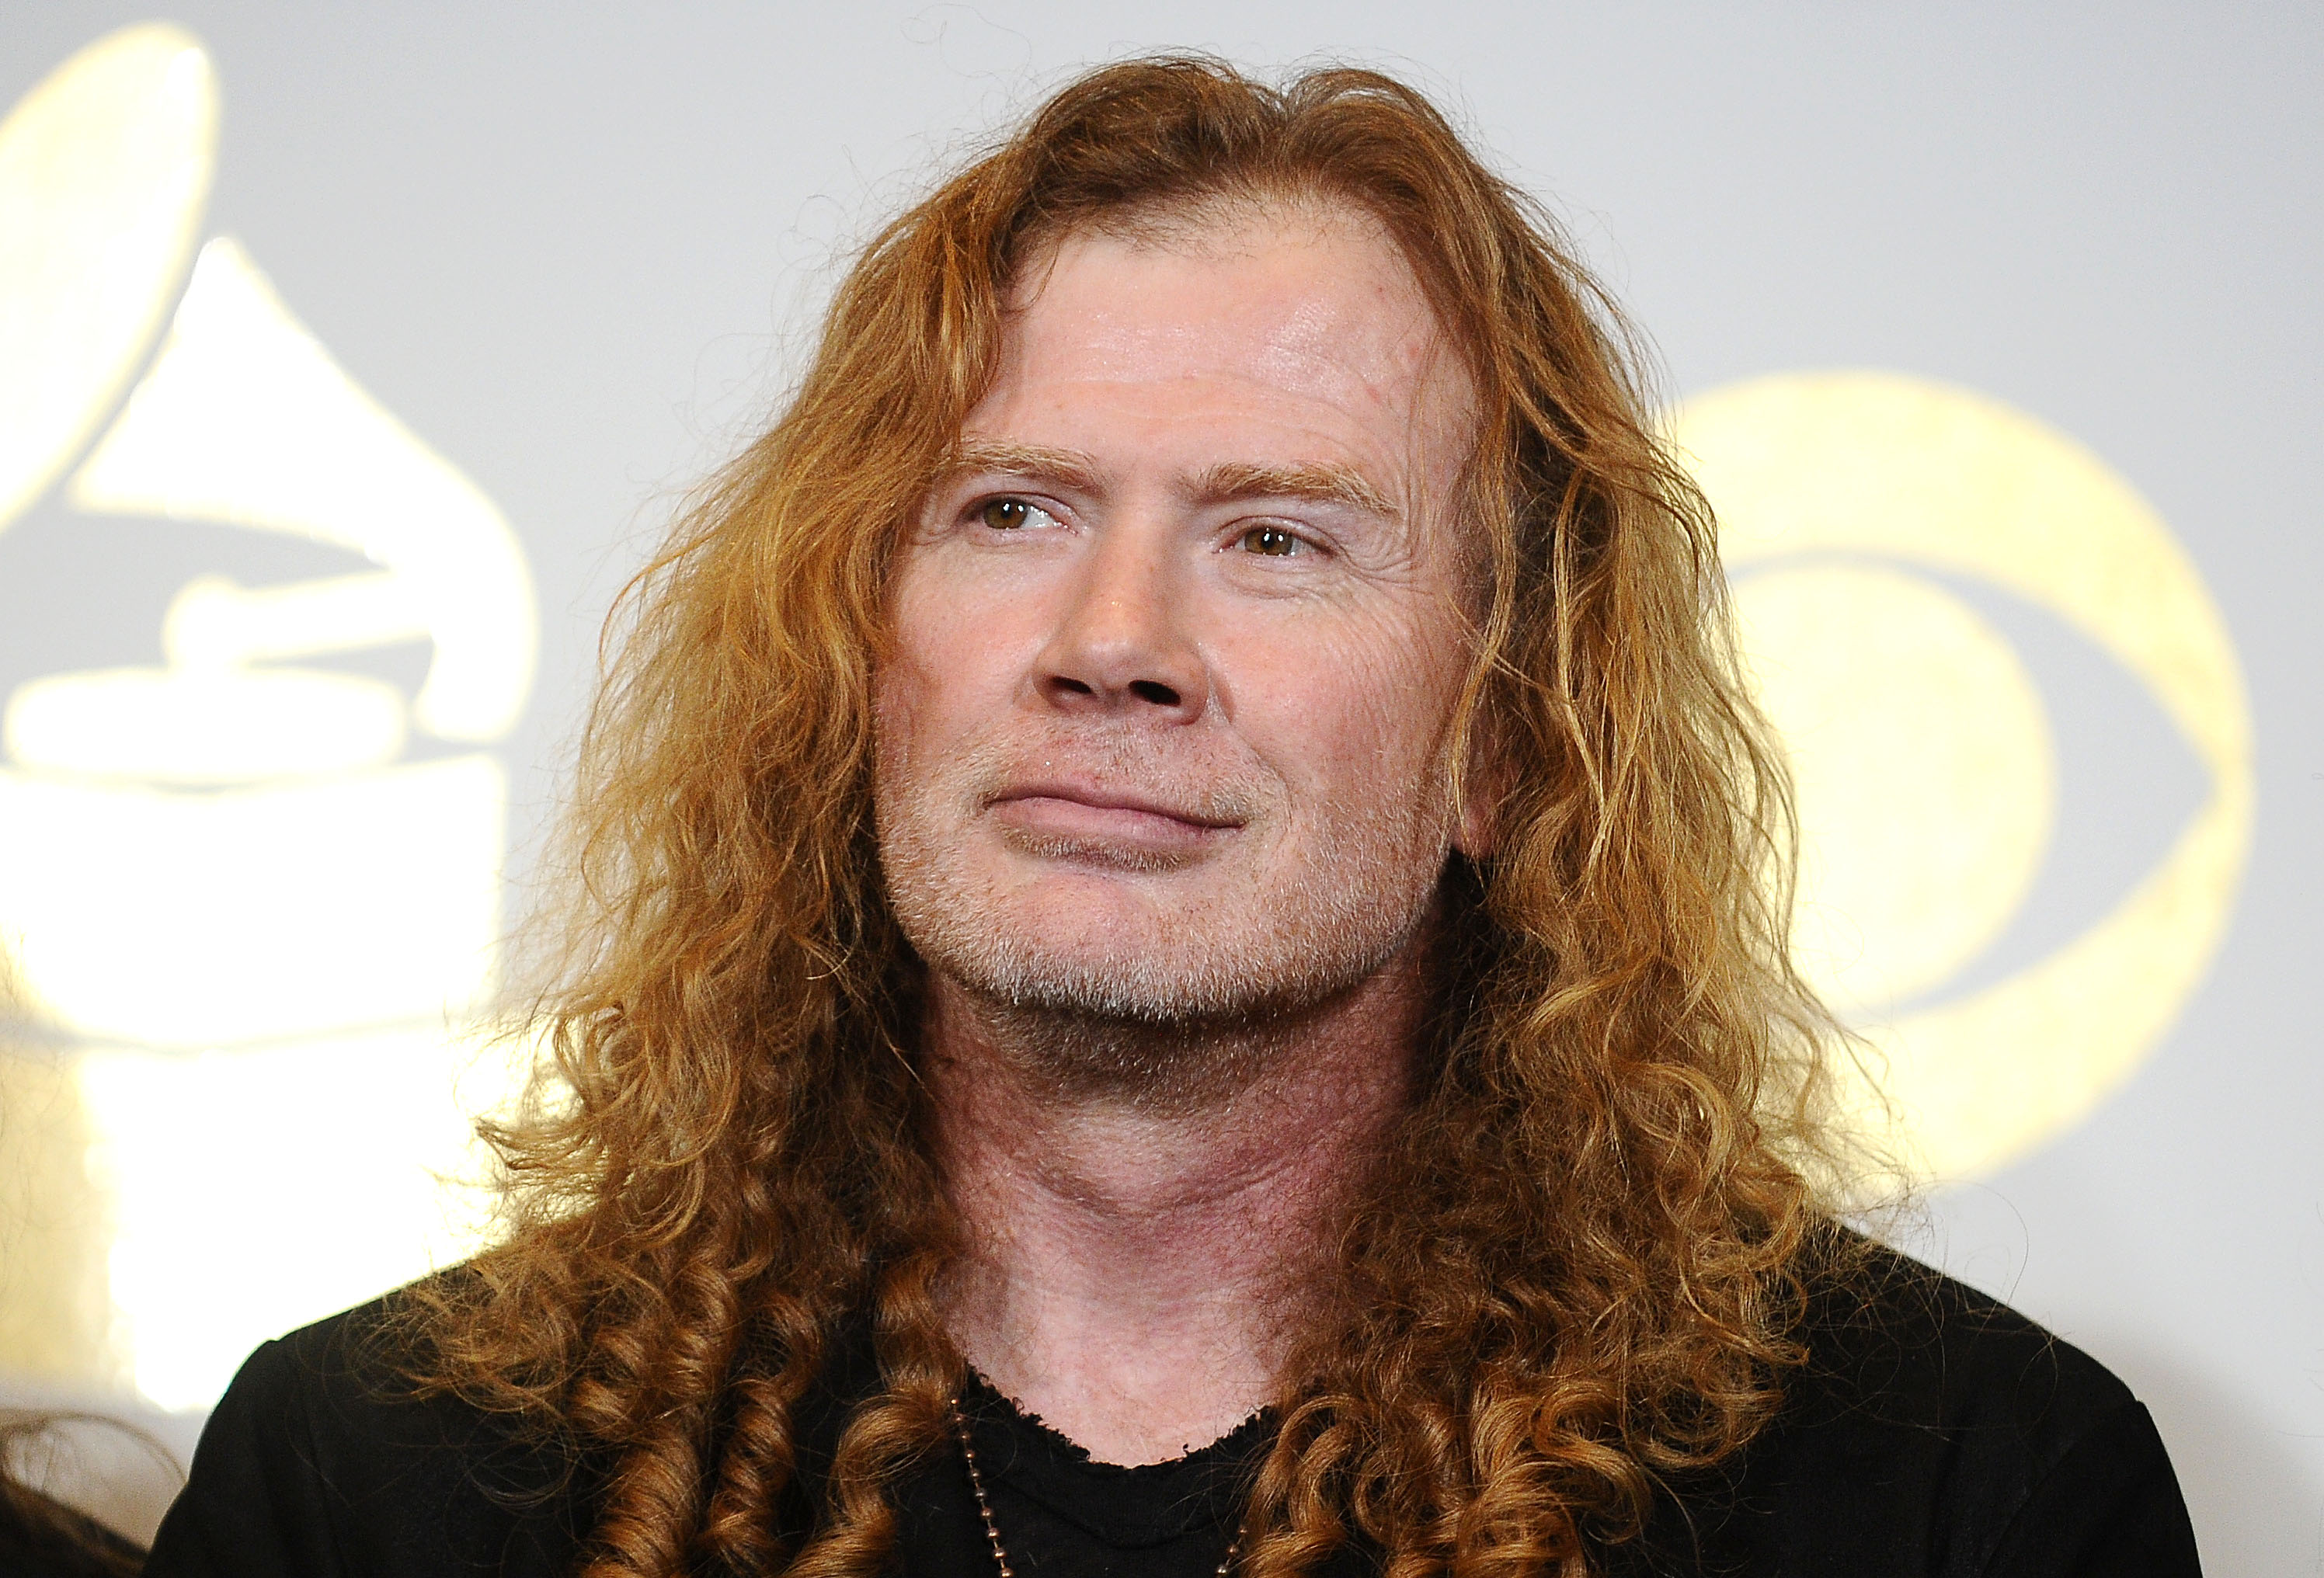 Megadeth's Dave Mustaine rants against mask mandate "tyranny"...